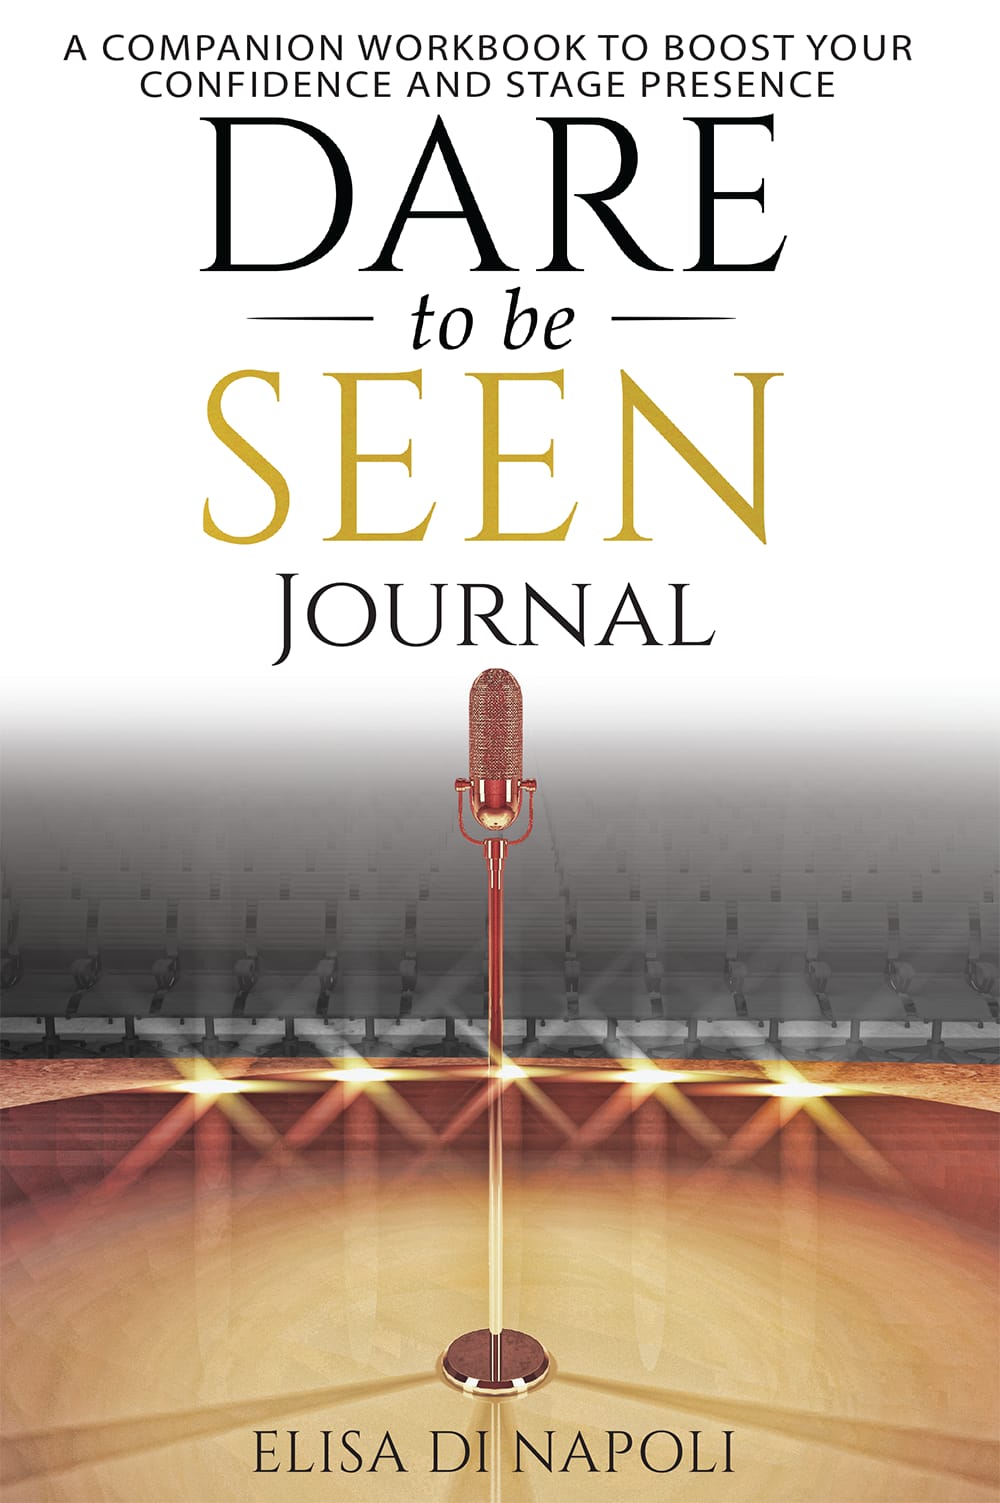 Dare to be seen journal